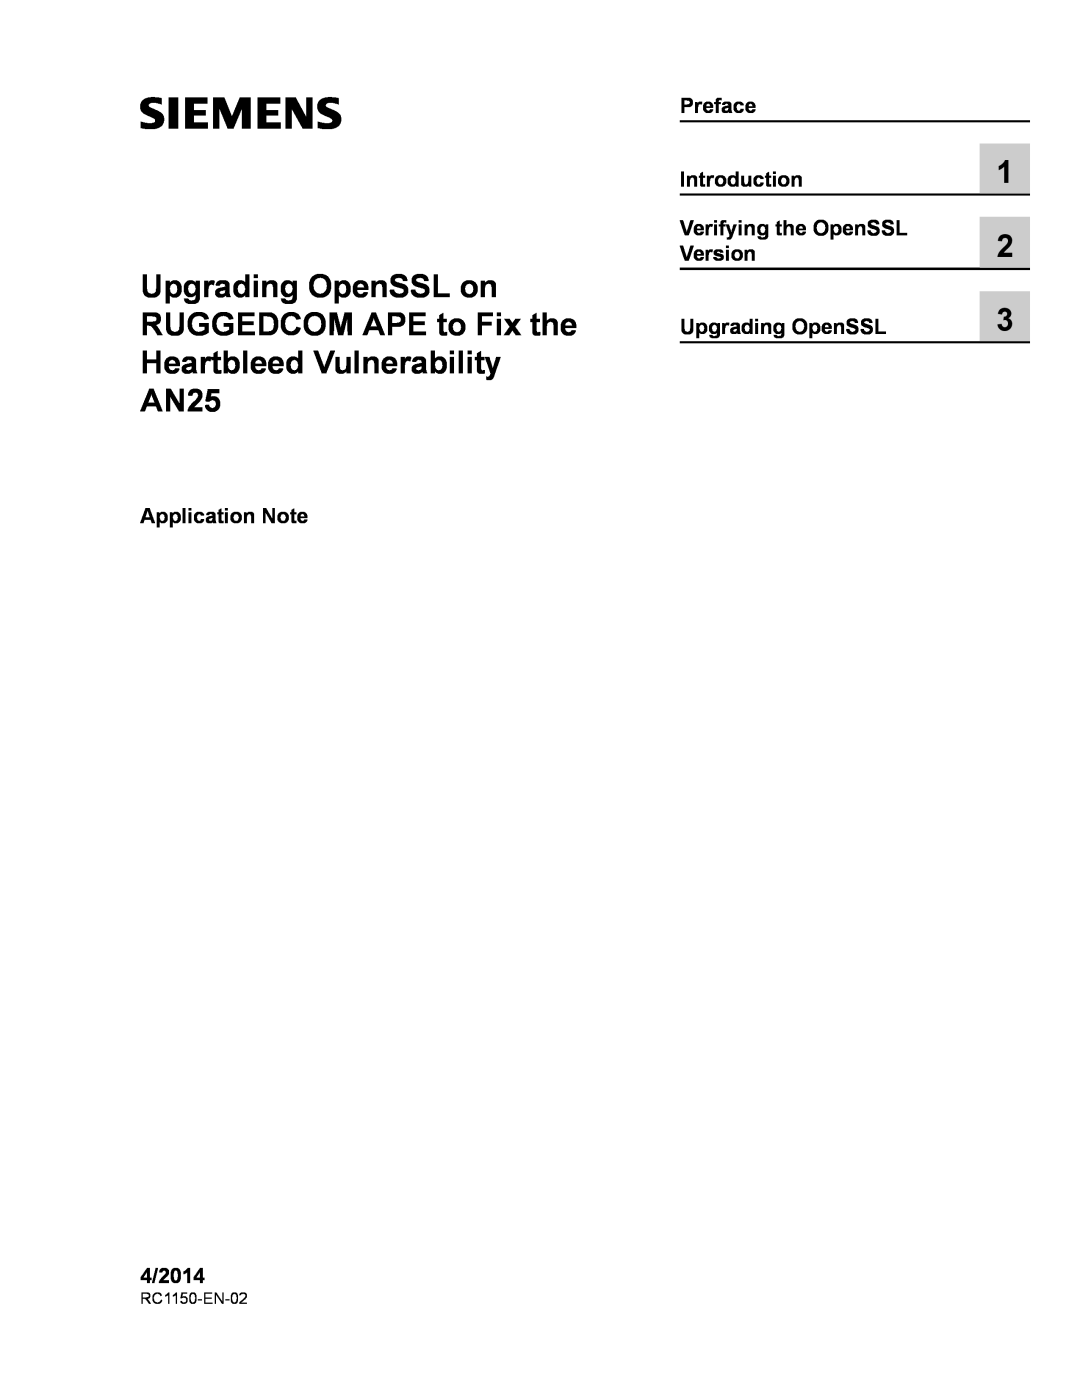 Siemens AN25 manual Application Note 4/2014, Preface Introduction, Verifying the OpenSSL Version Upgrading OpenSSL 